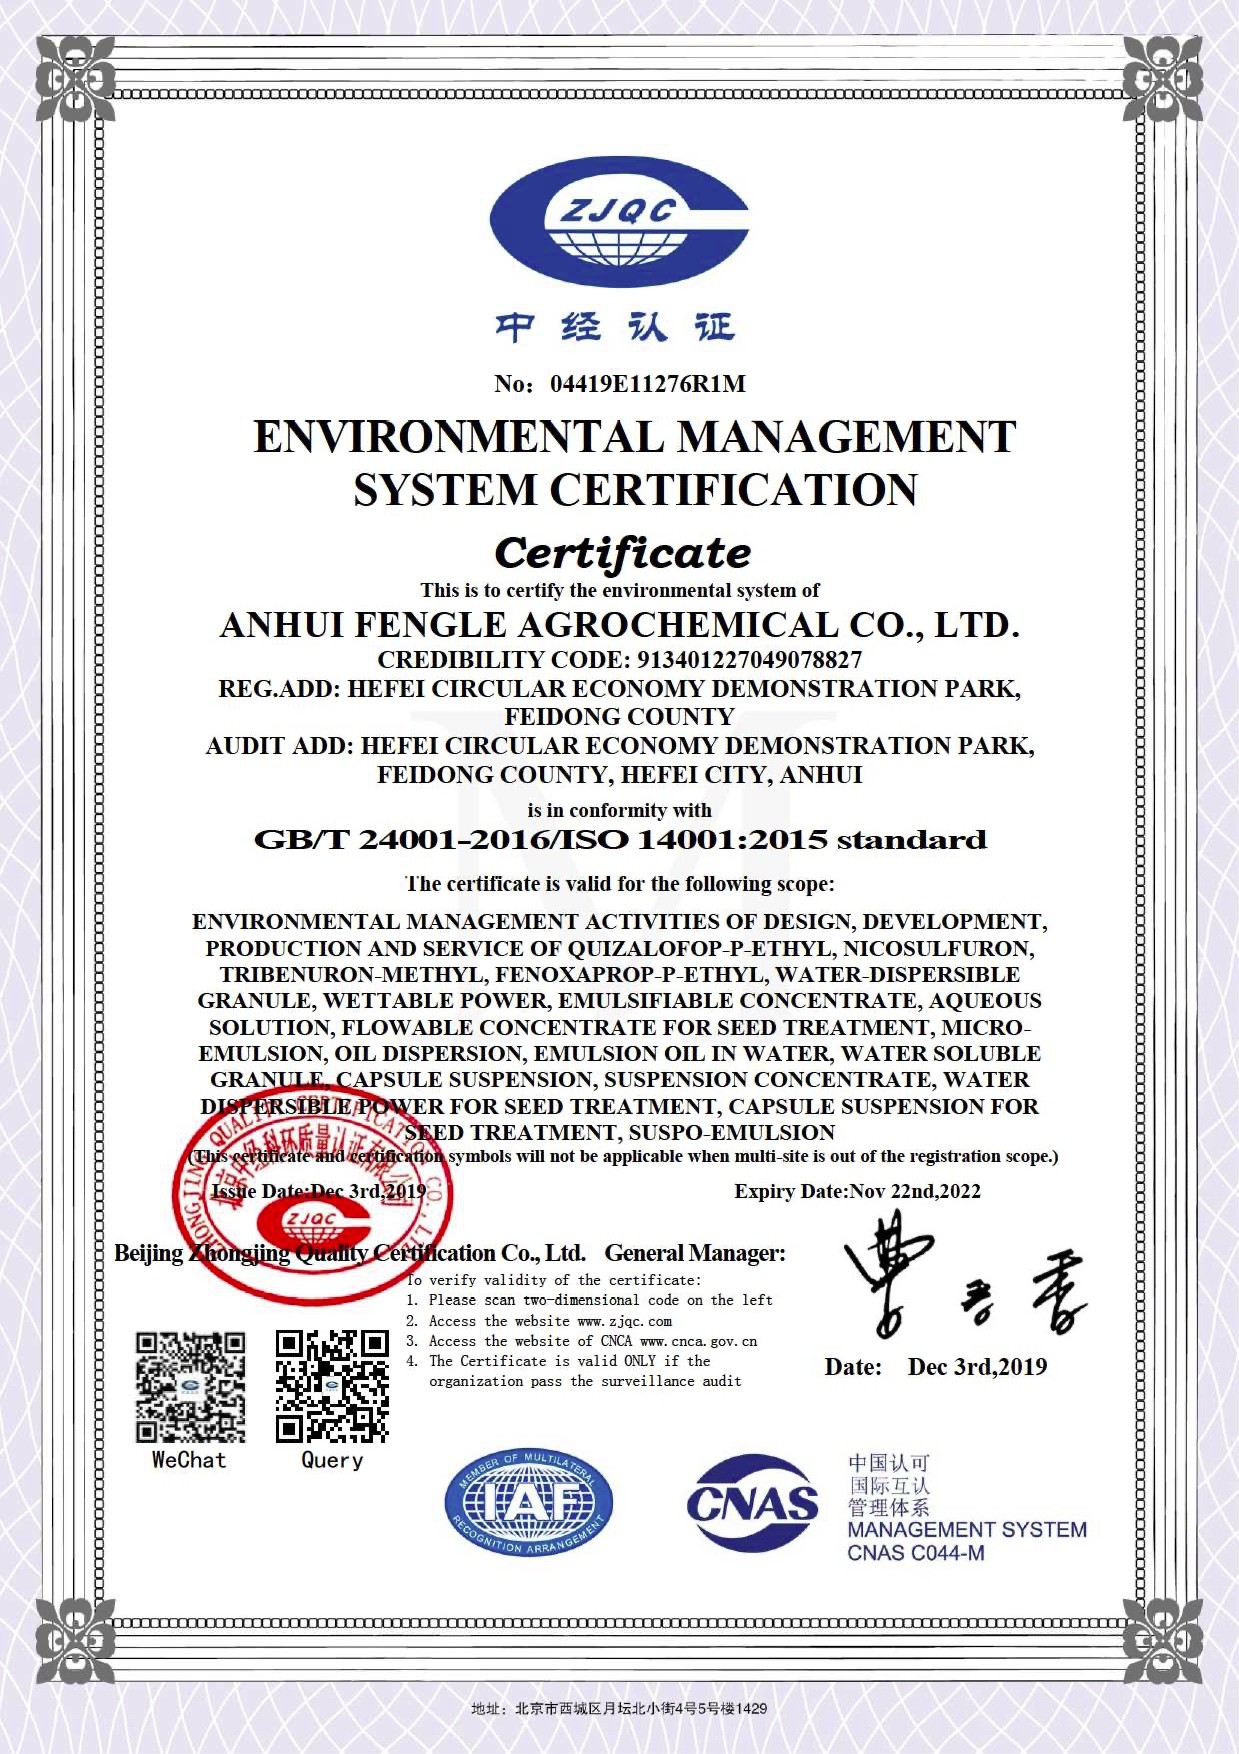 Anhui Fengle Agrochemical Co., Ltd. Certifications